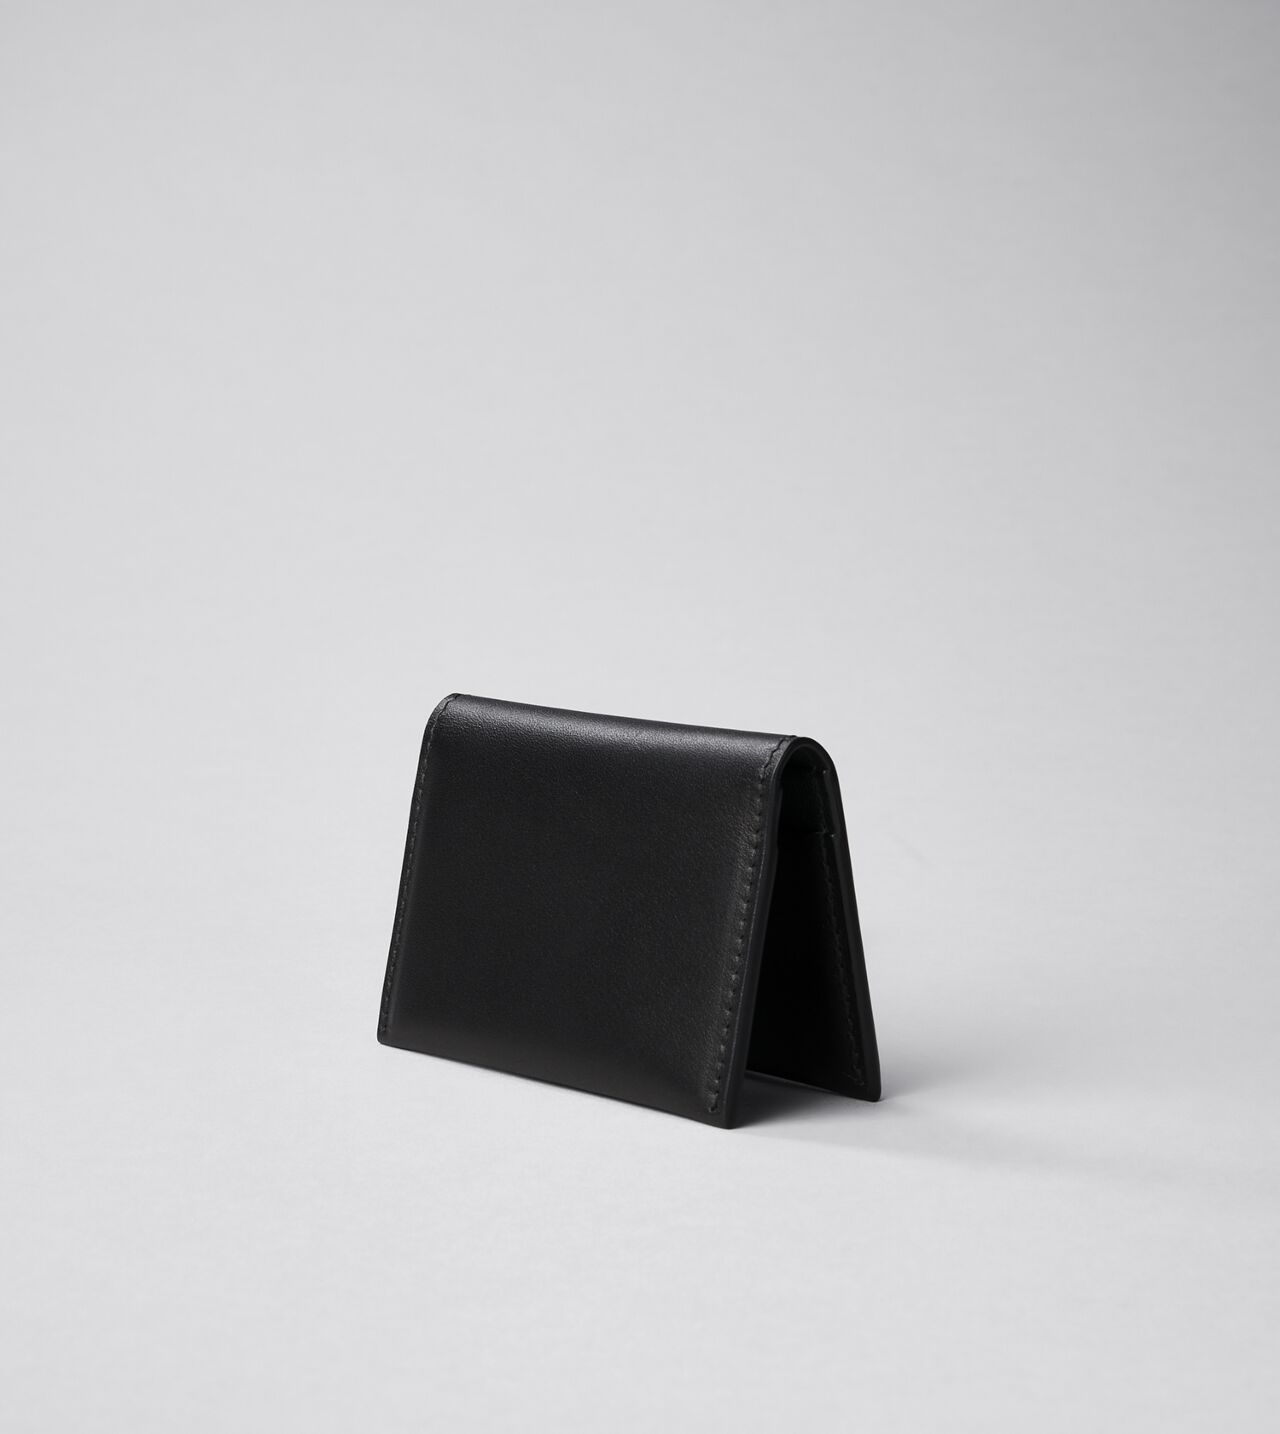 Picture of Byredo Business card holder in Black leather